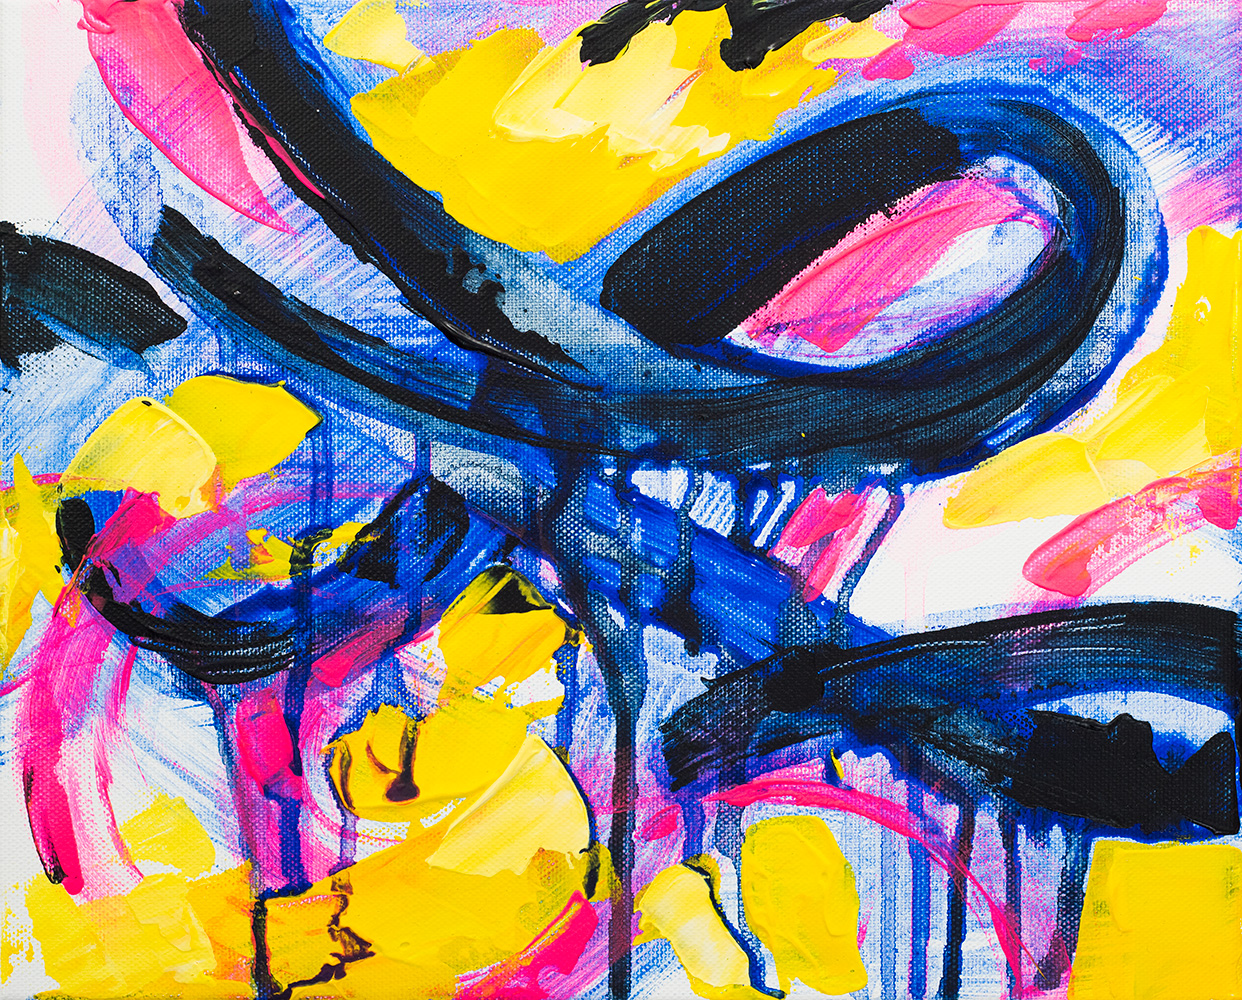 Franziska Schwade - Daily Painting 151023 "Neon Infinity" Acrylics on stretched canvas 24x30 cm / 9.4x11.8 inch